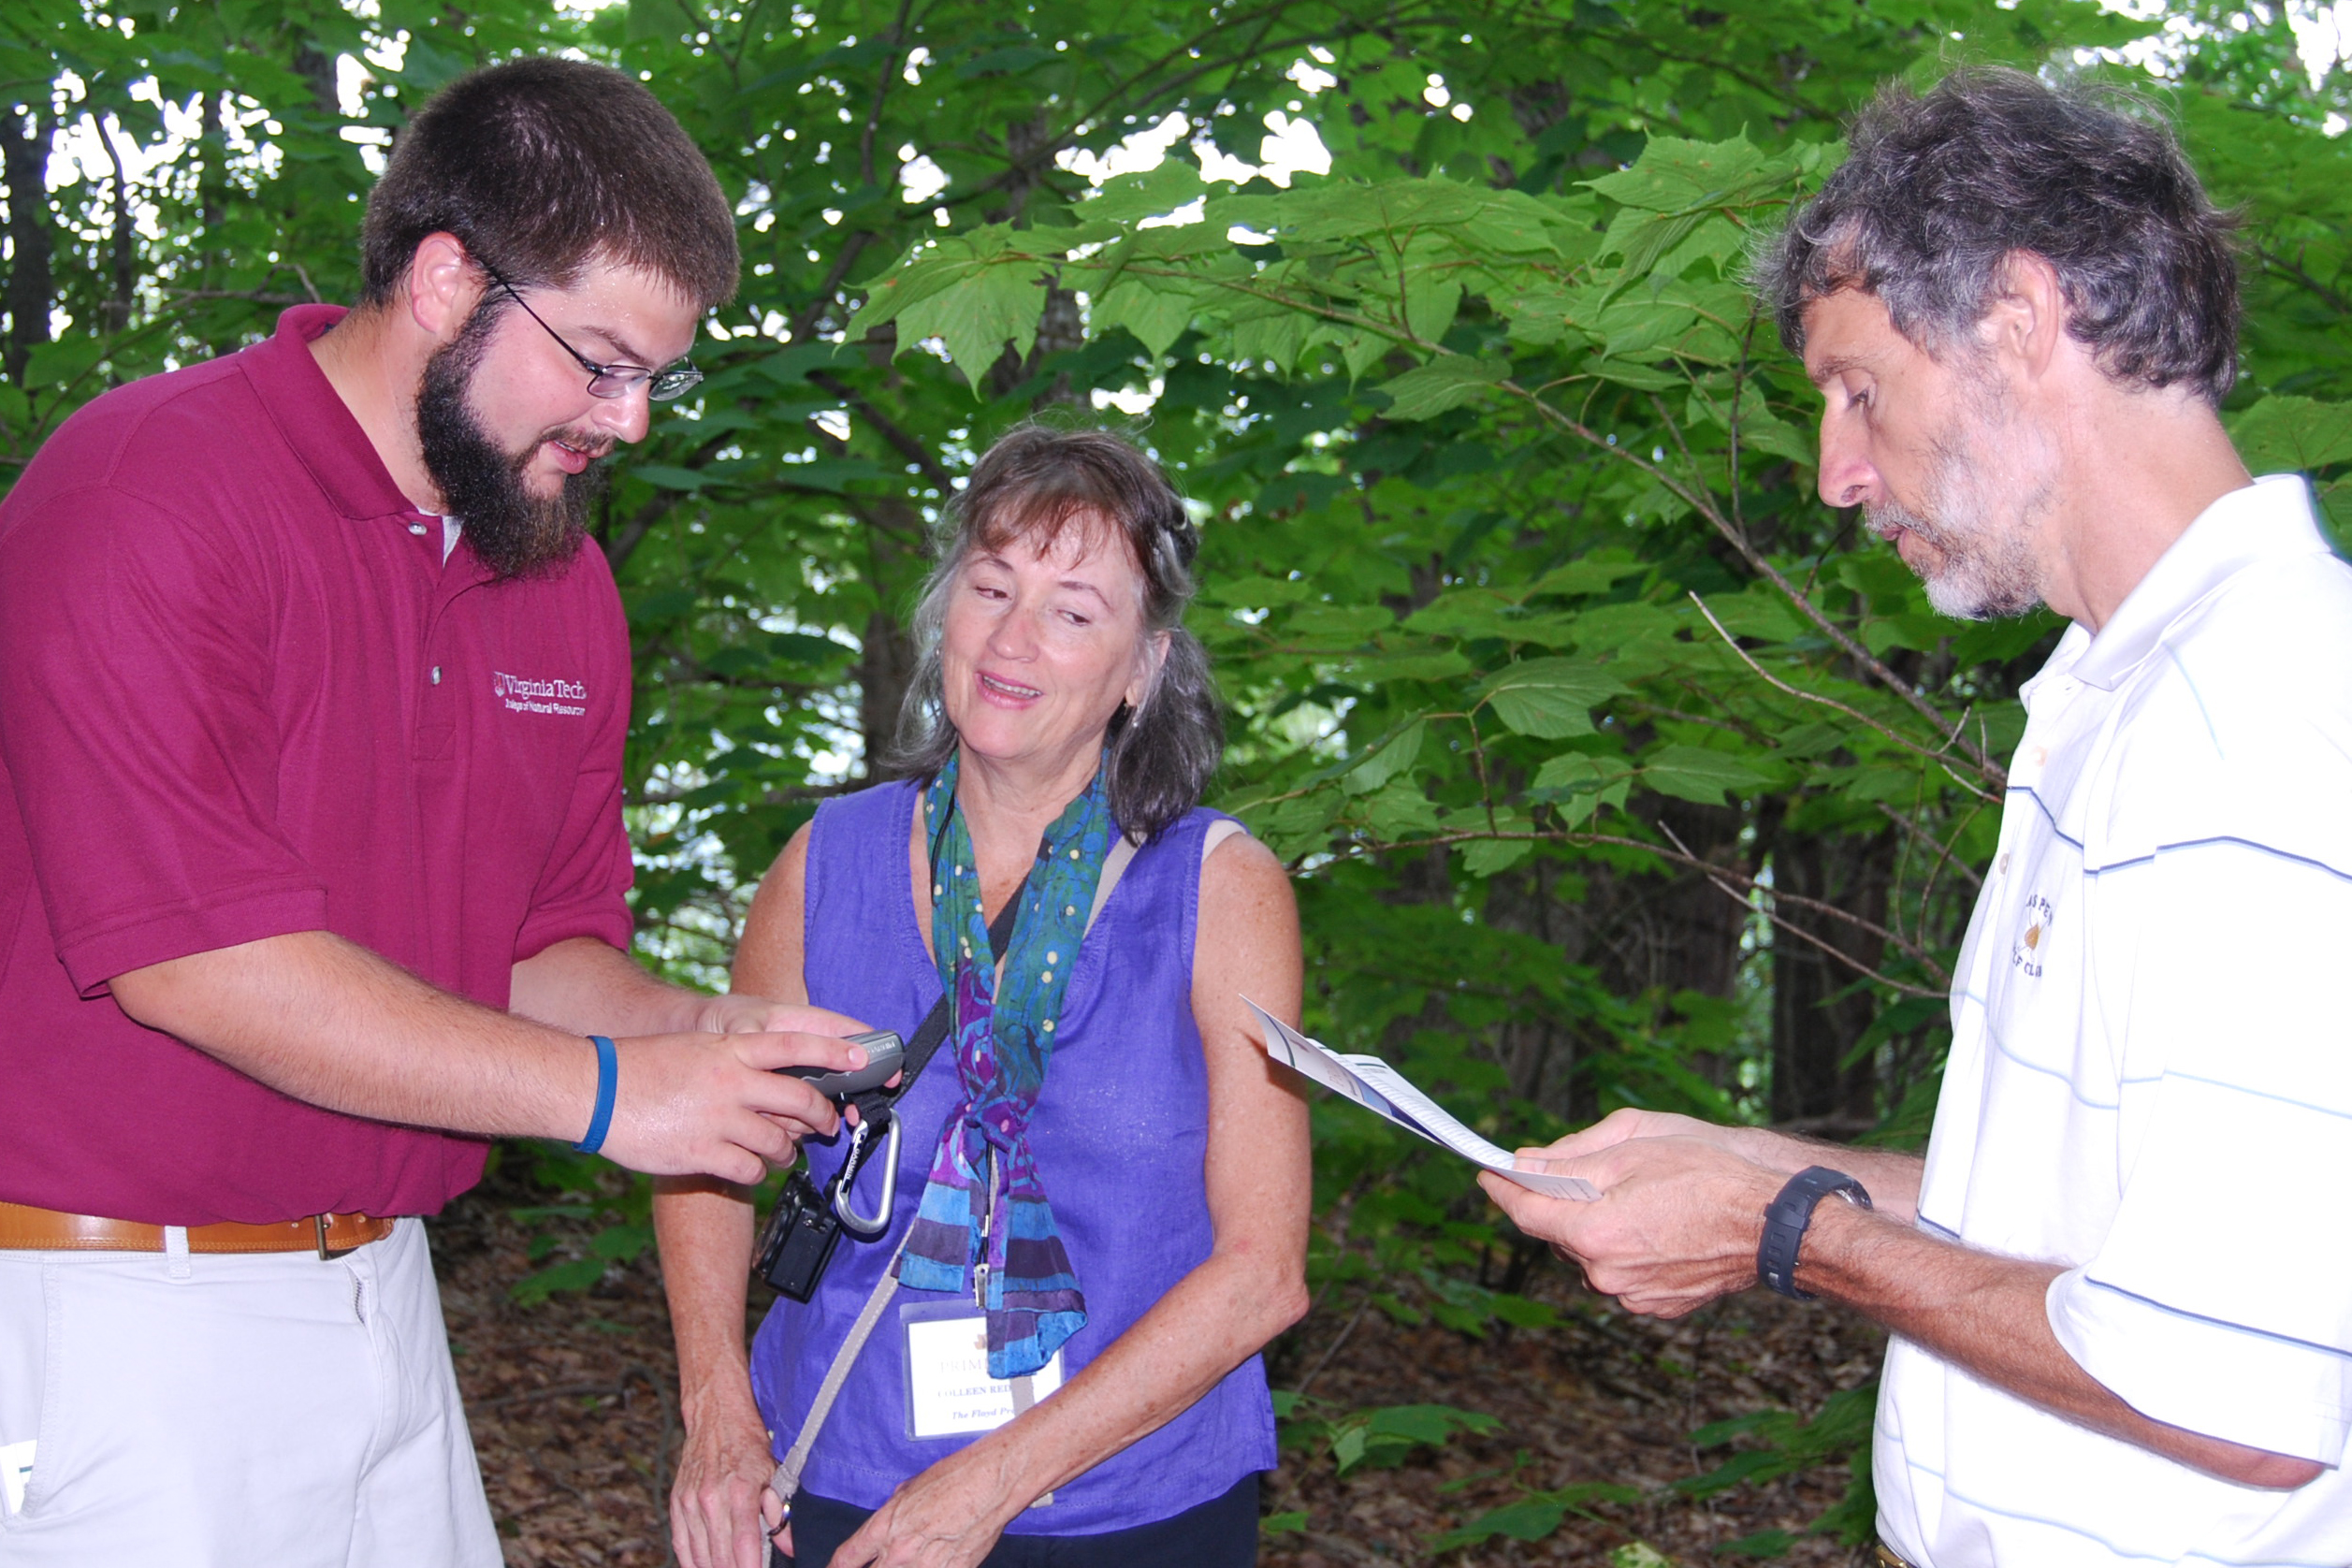 An instructor showing two participants how to use a GPS in a wooded setting.